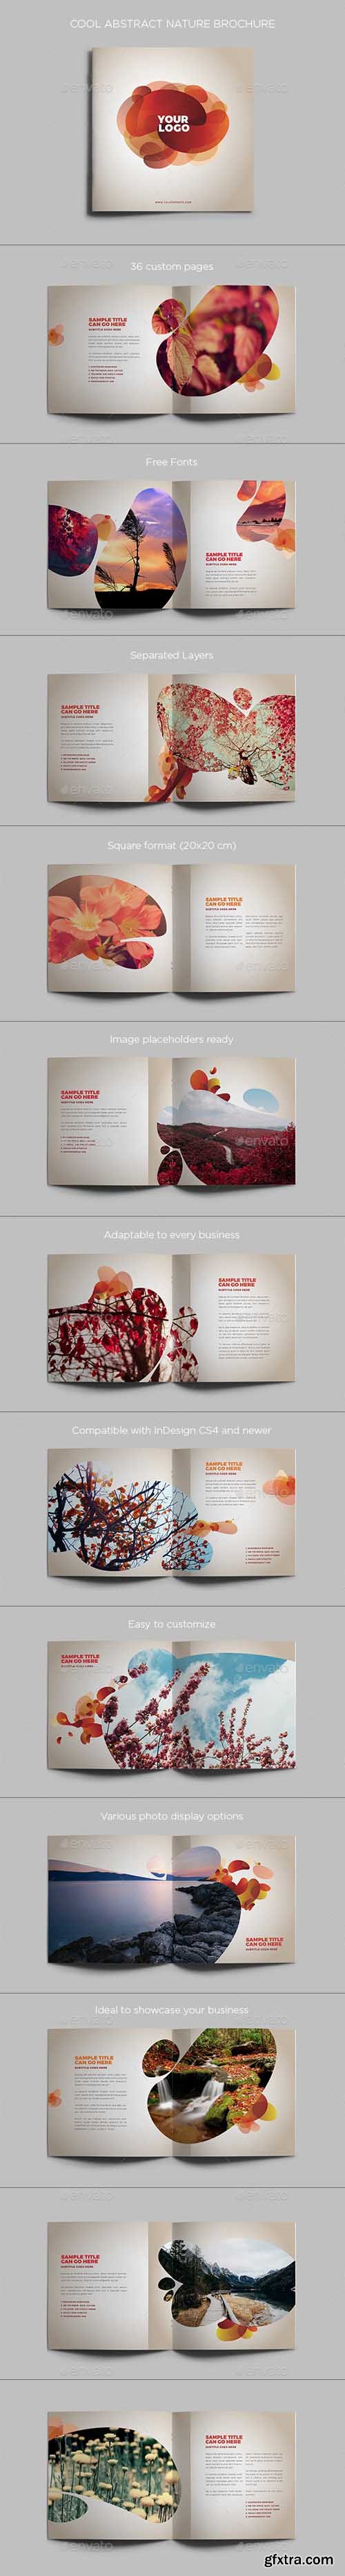 GR - Cool Abstract Nature Brochure 4628780